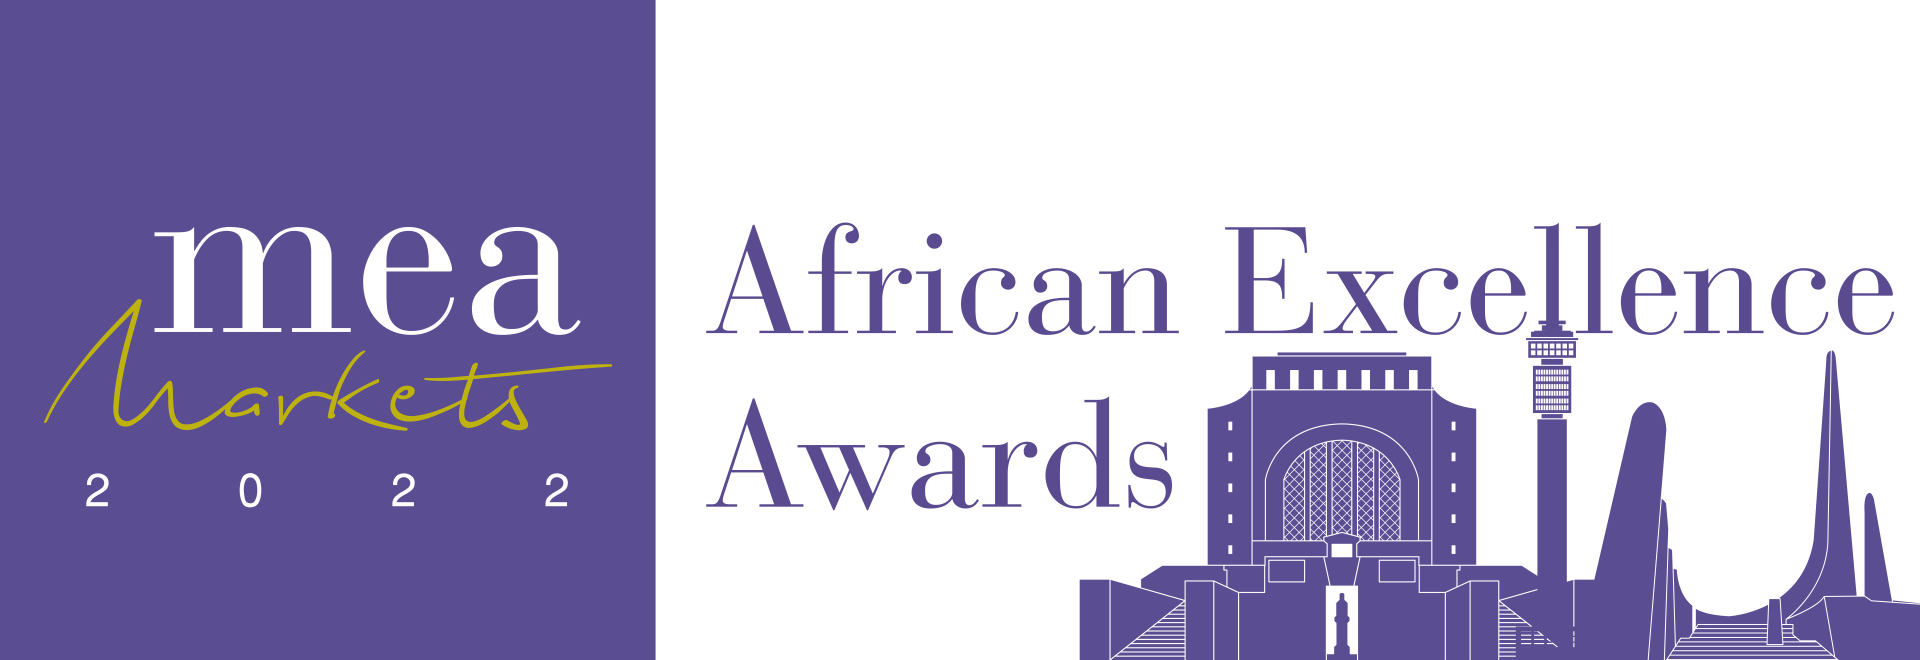 MEA Markets Magazine Announces the Winners of the 2022 African Excellence  Awards - MEA Markets